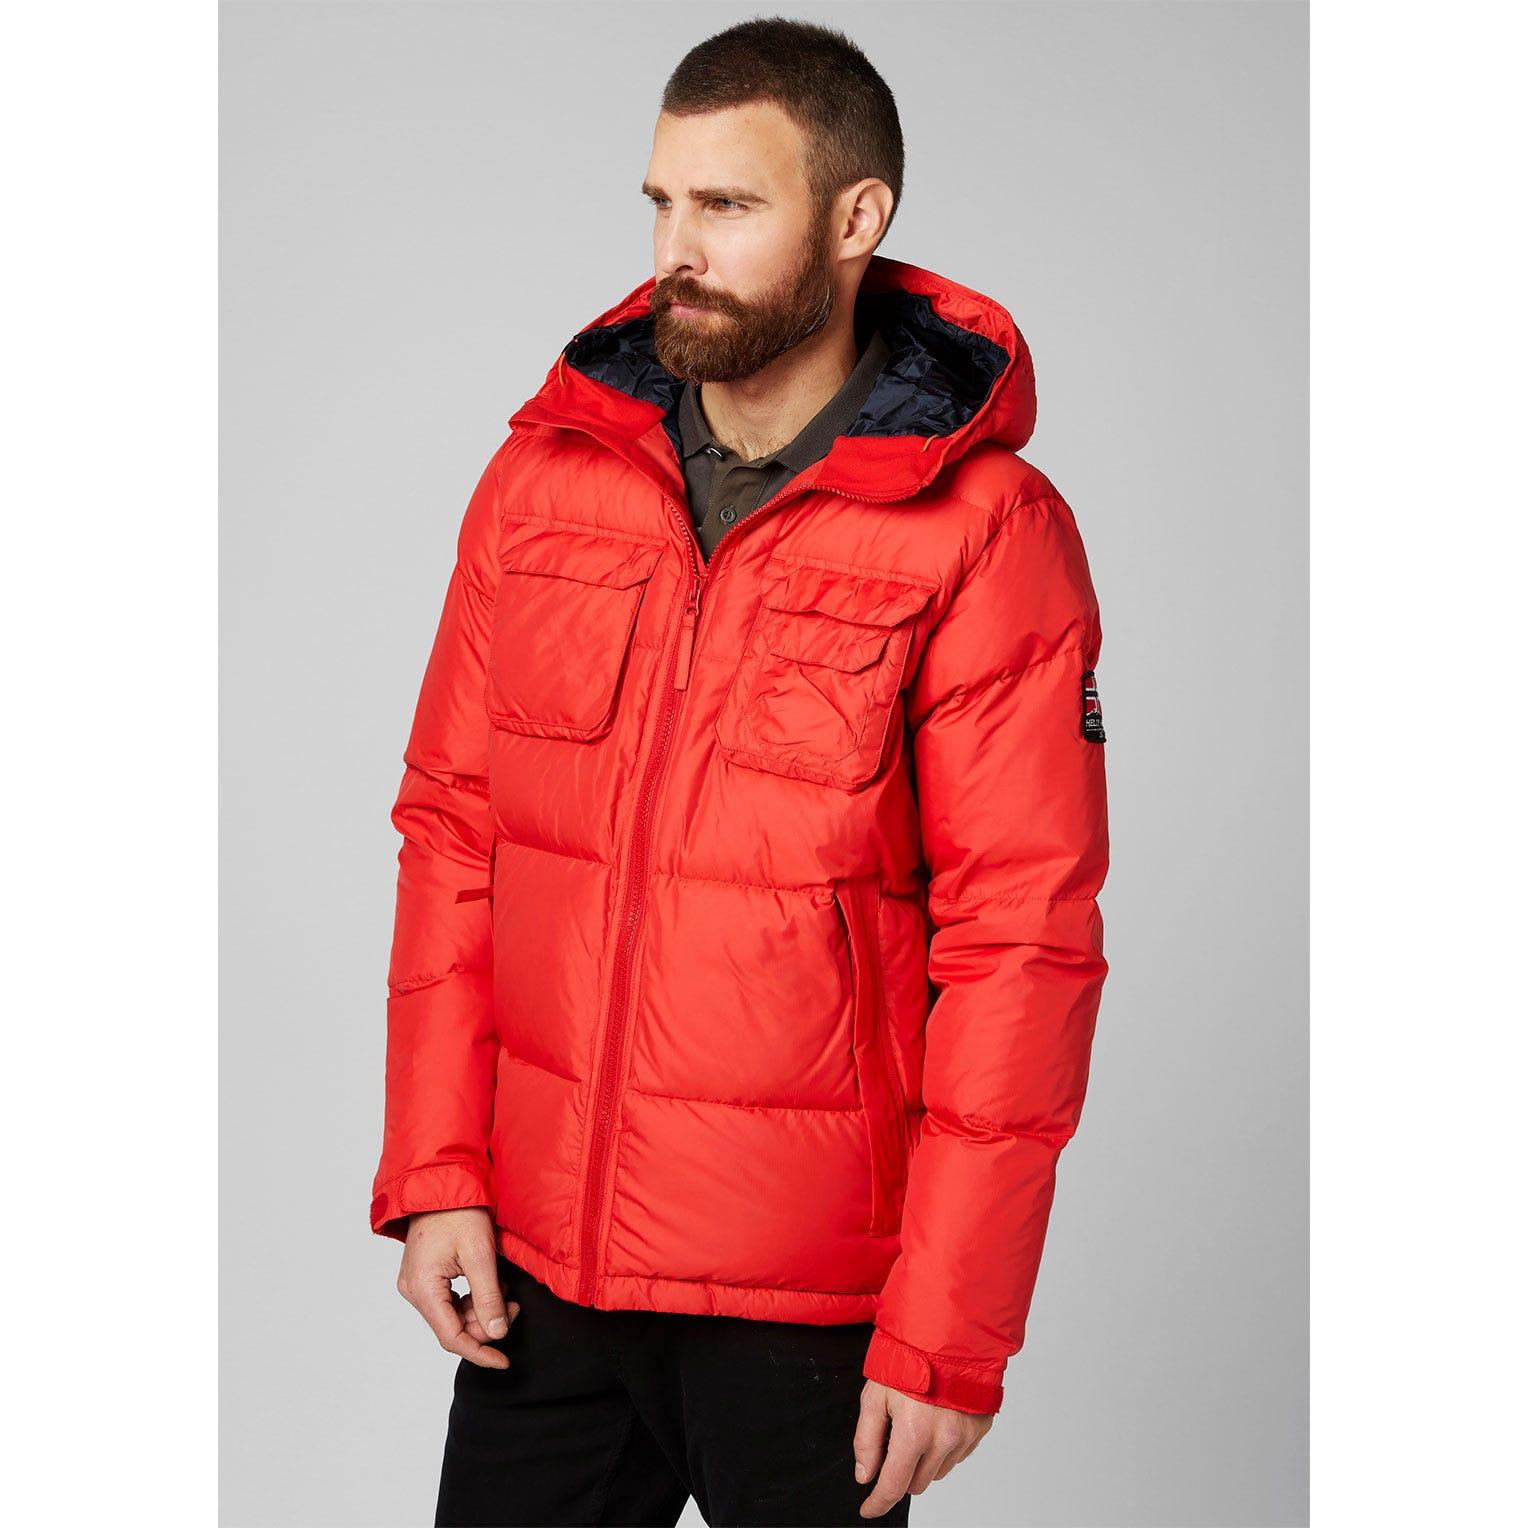 Helly Hansen Norse Down Jacket Red for Men - Lyst